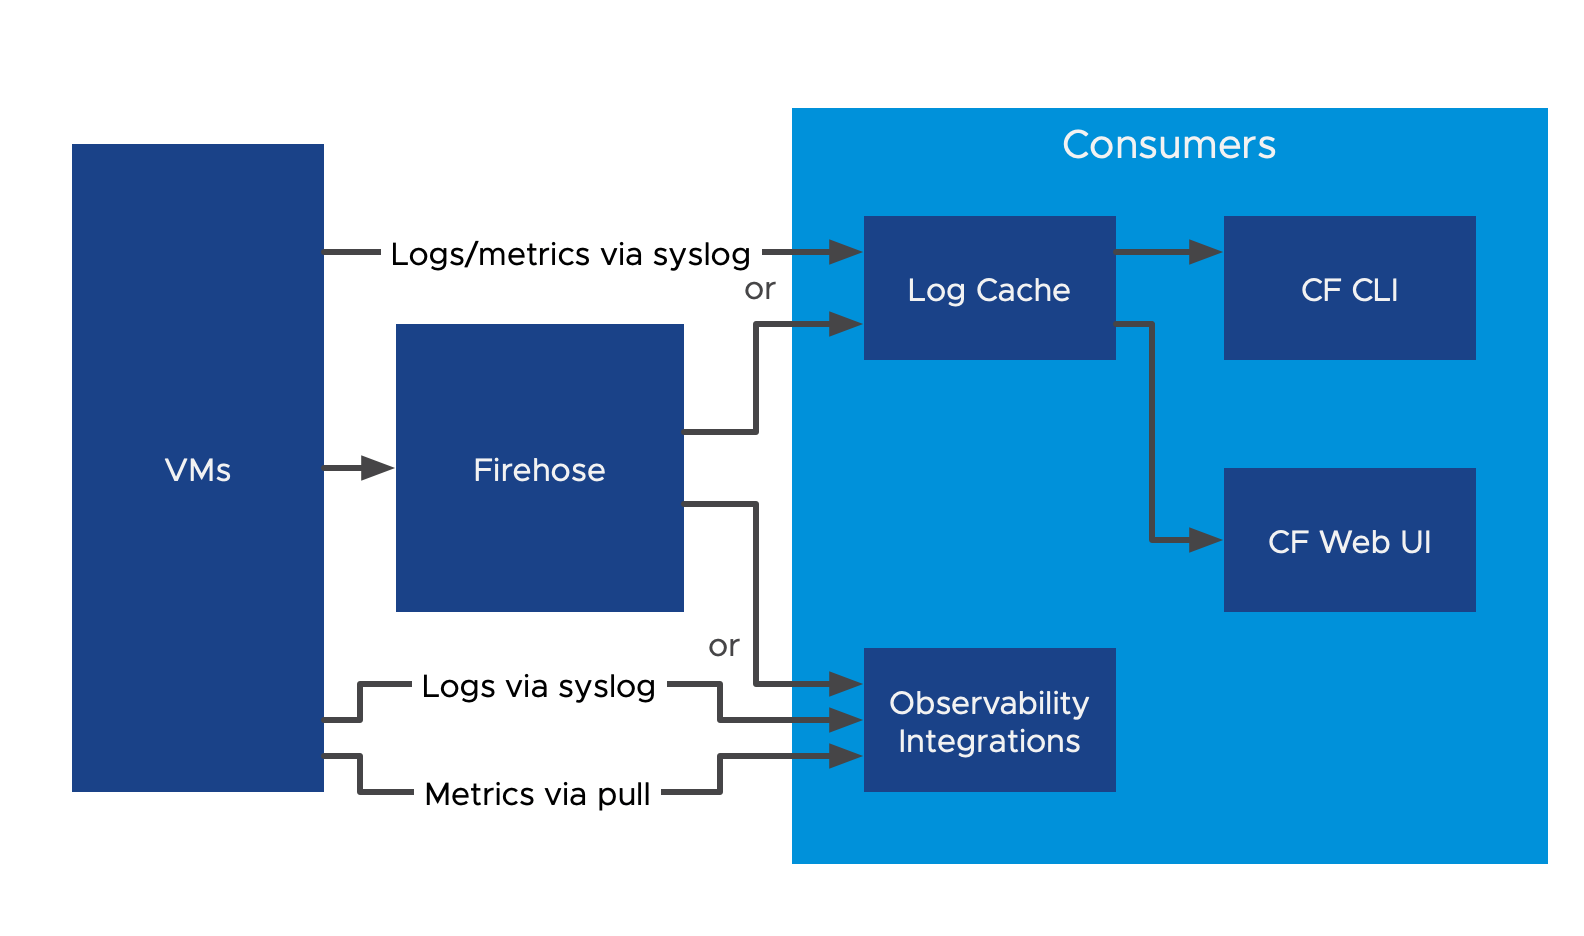 A Forwarder Agent appears inside a square labeled VMs. Apps are shown sending to the Forwarder Agent, and Components are shown sending metrics to the the Forwarder Agent. Components also send logs to rsyslog, which then sends platform logs outside the system through syslog RFC 5424. The Forwarder Agent sends to three downstream consumers. The Syslog Agent sends app logs through syslog RFC 5424. The Metrics Agent exposes metrics through Prometheus endpoints. Finally, the Loggregator Agent sends metrics and app logs through syslog RFC 5424.